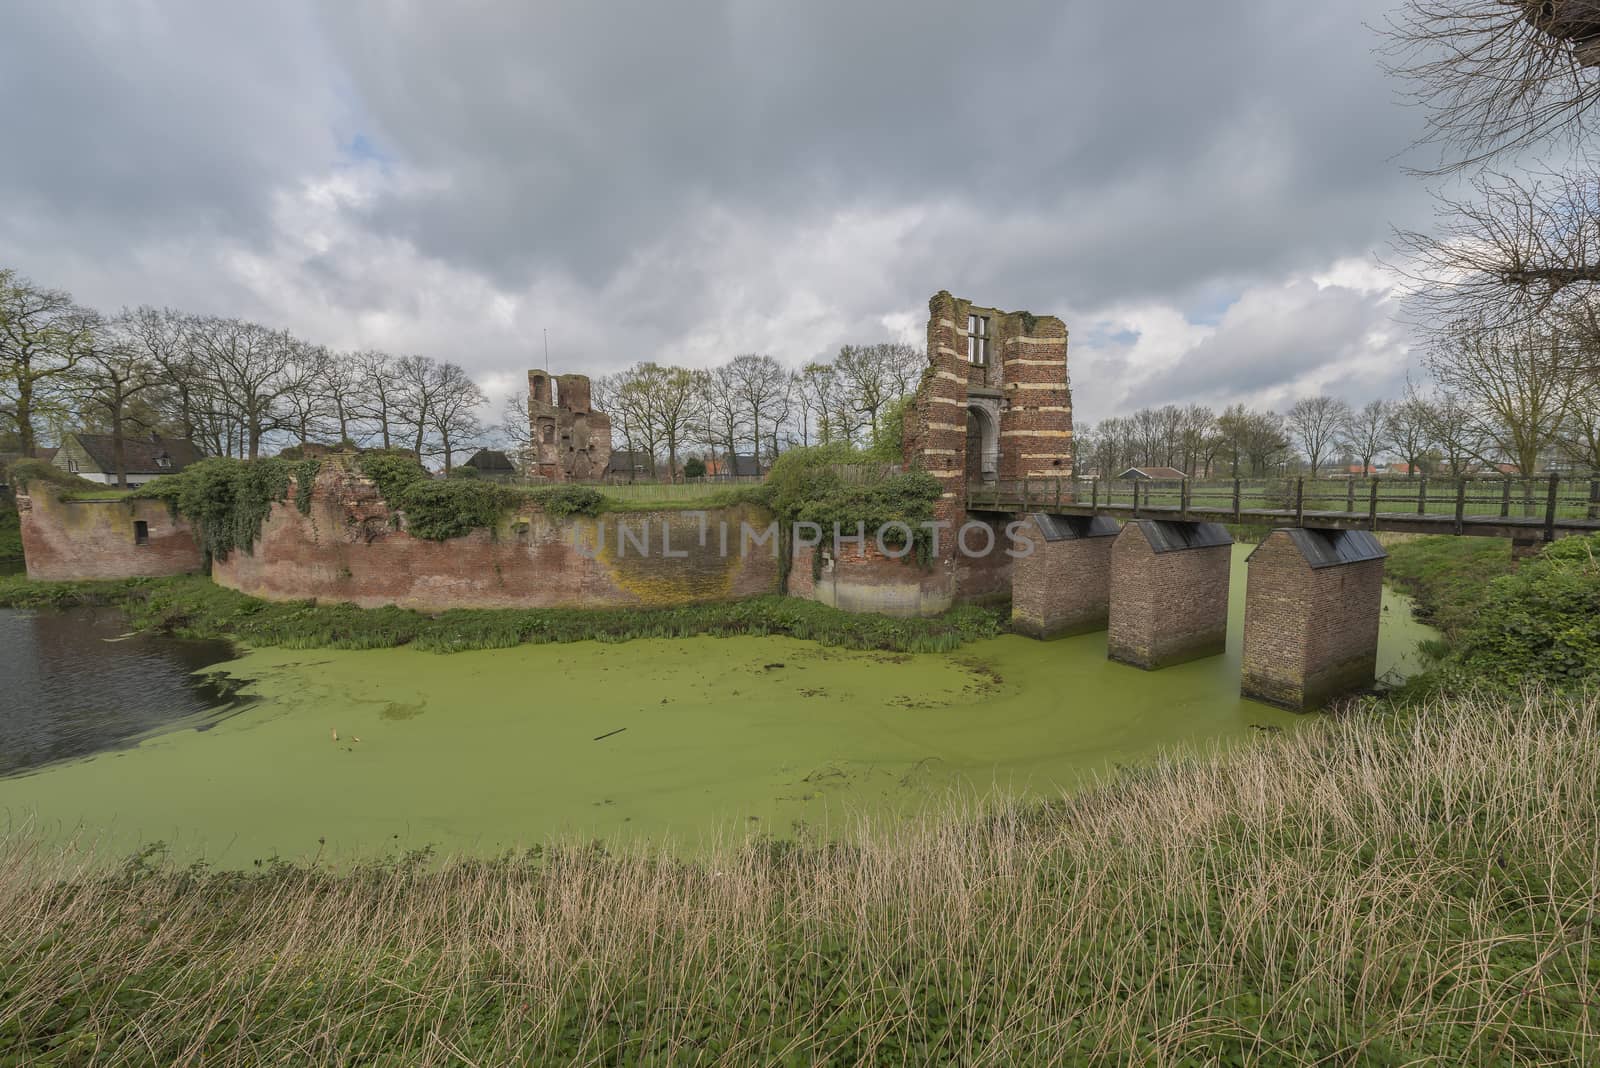 Ruins of an old medieval castle in the town of Batenburg in the Netherlands
